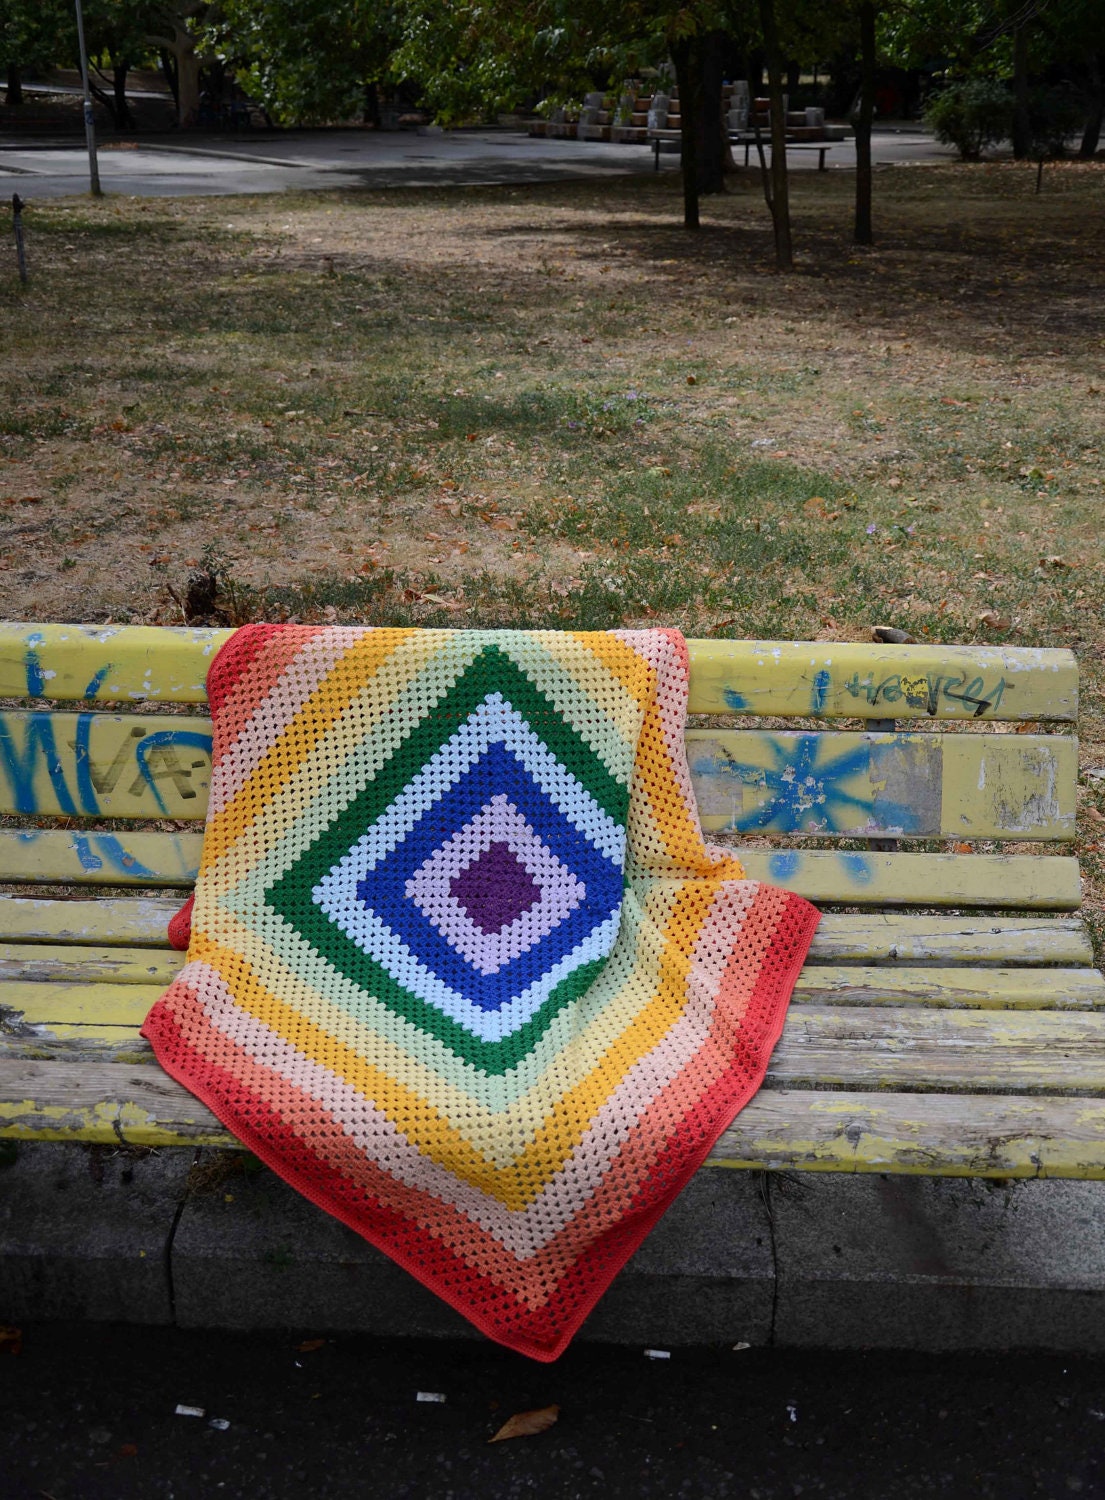 Rainbow Crocheted Baby Blanket Granny Square Multicolor designed by Columbinecrochet on Etsy